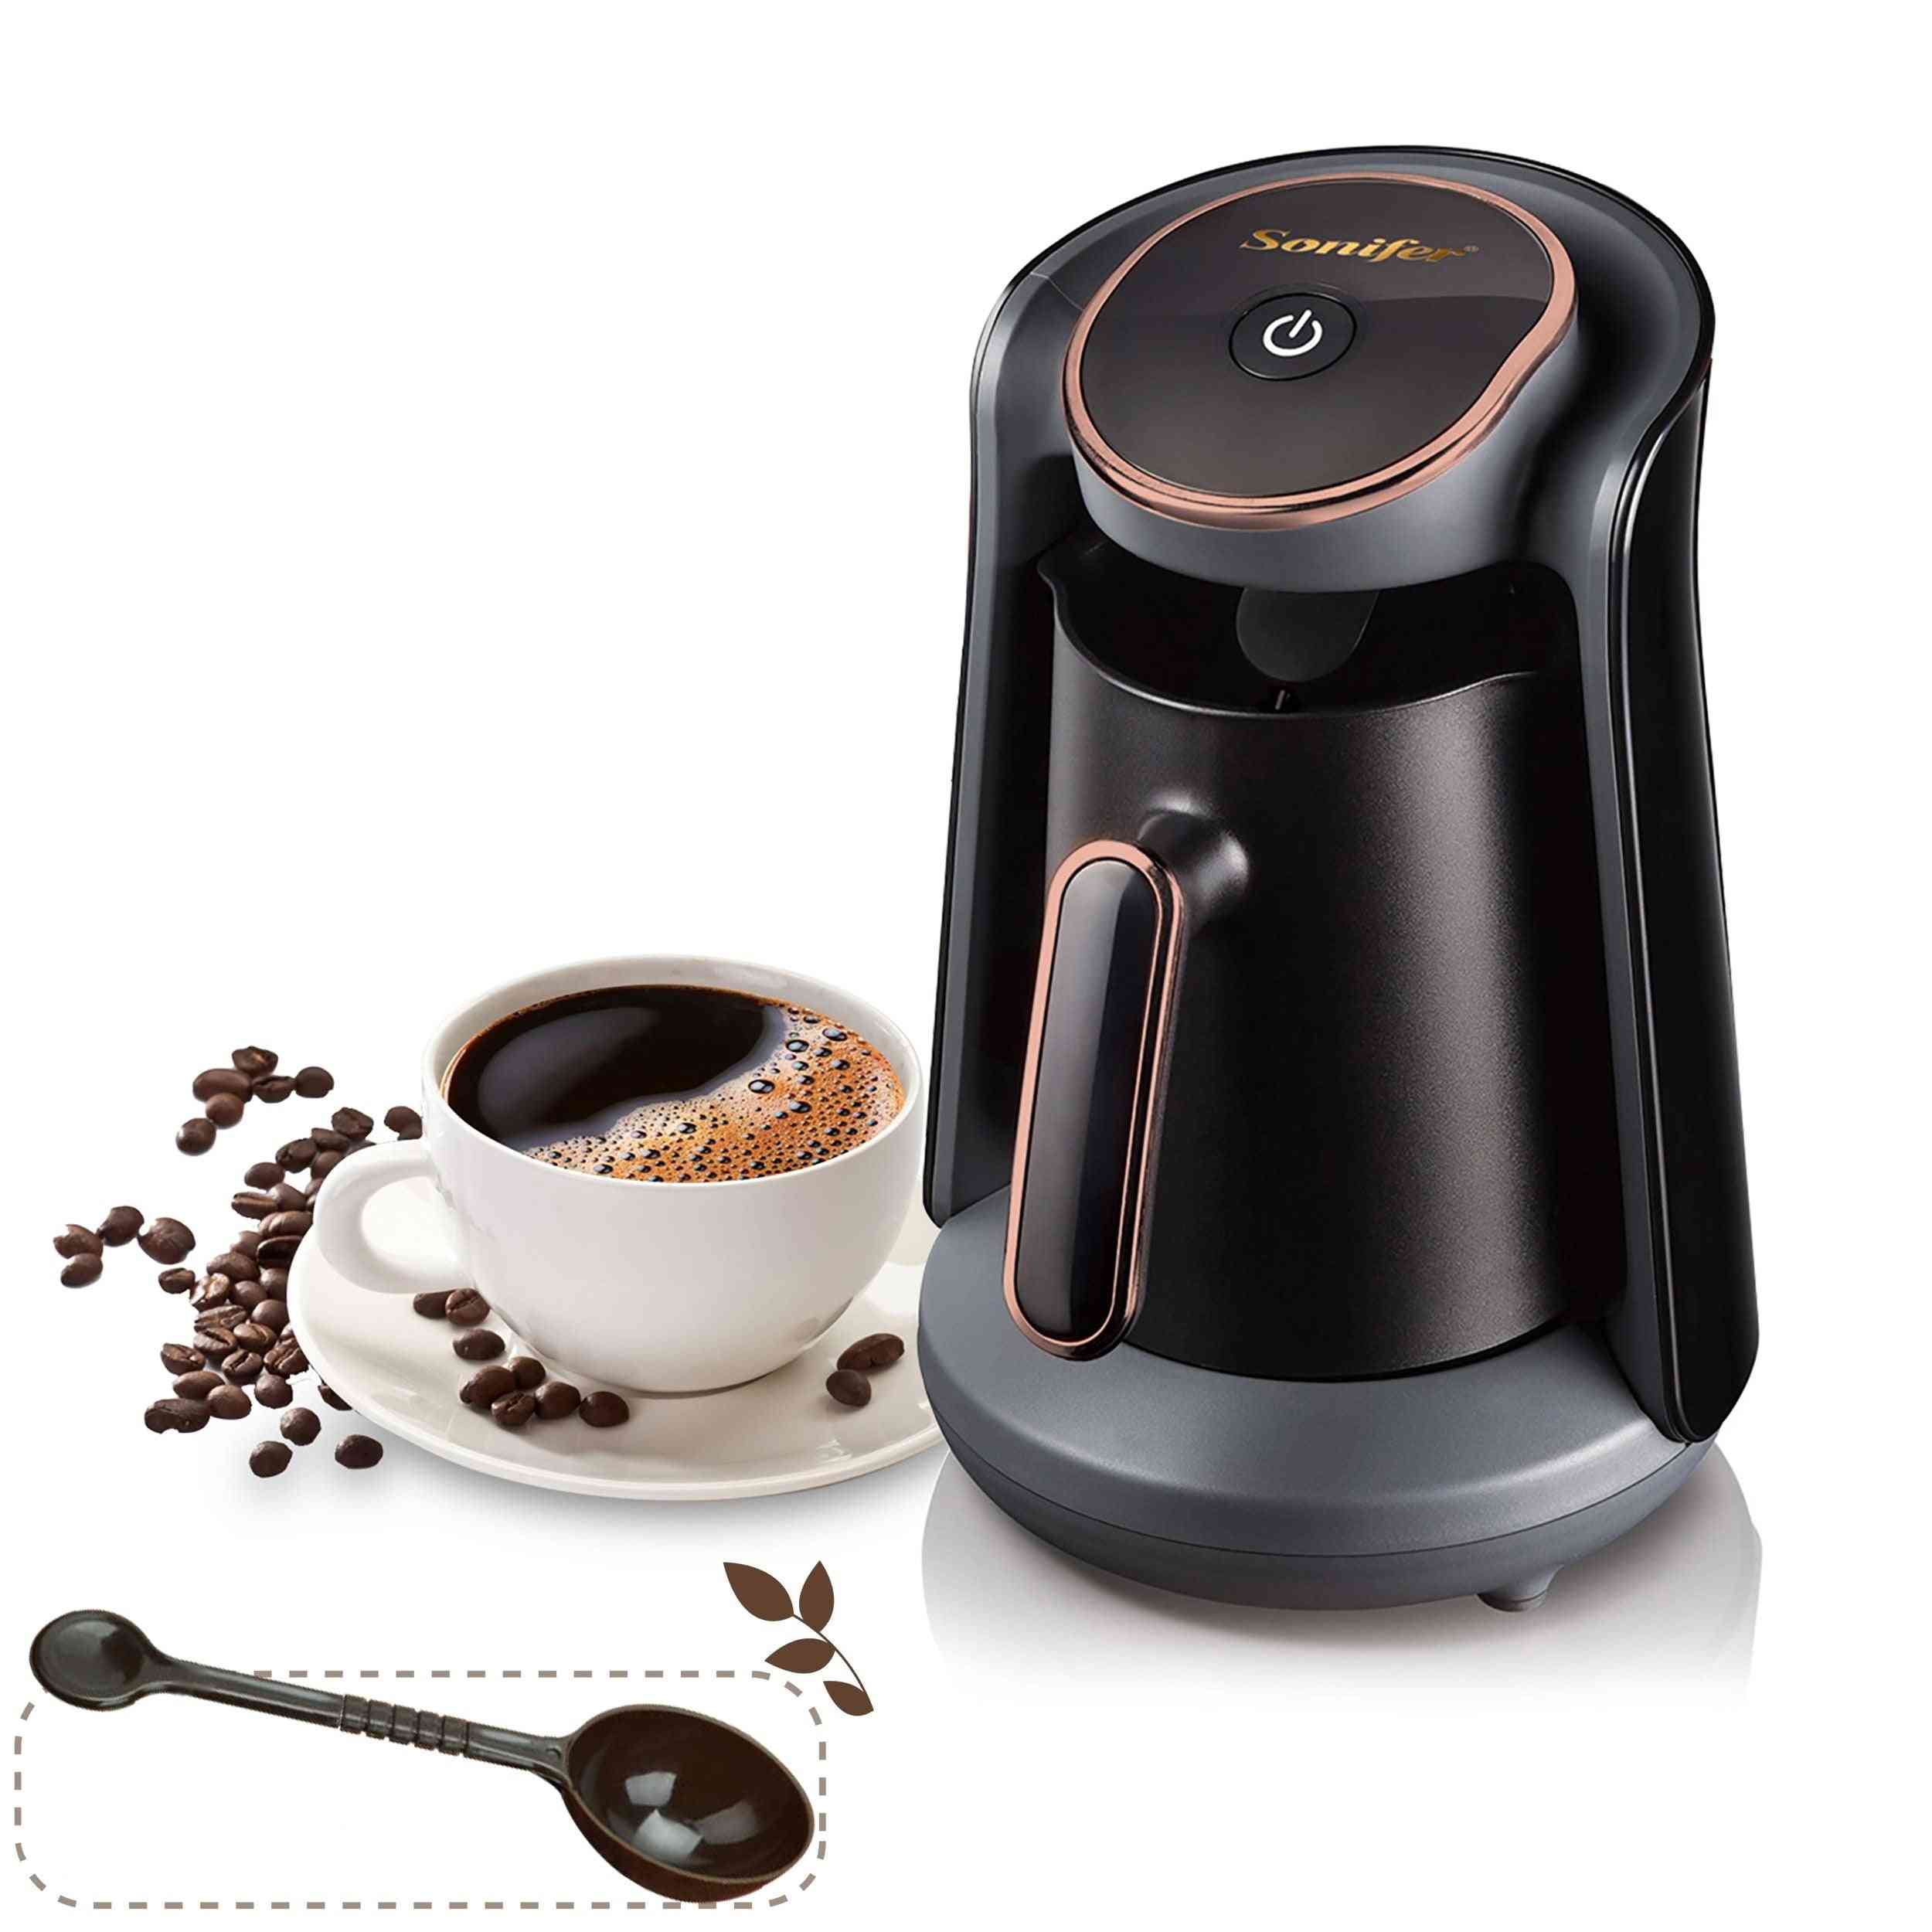 Portable Automatic Turkish Coffee Maker, Sound Warning System